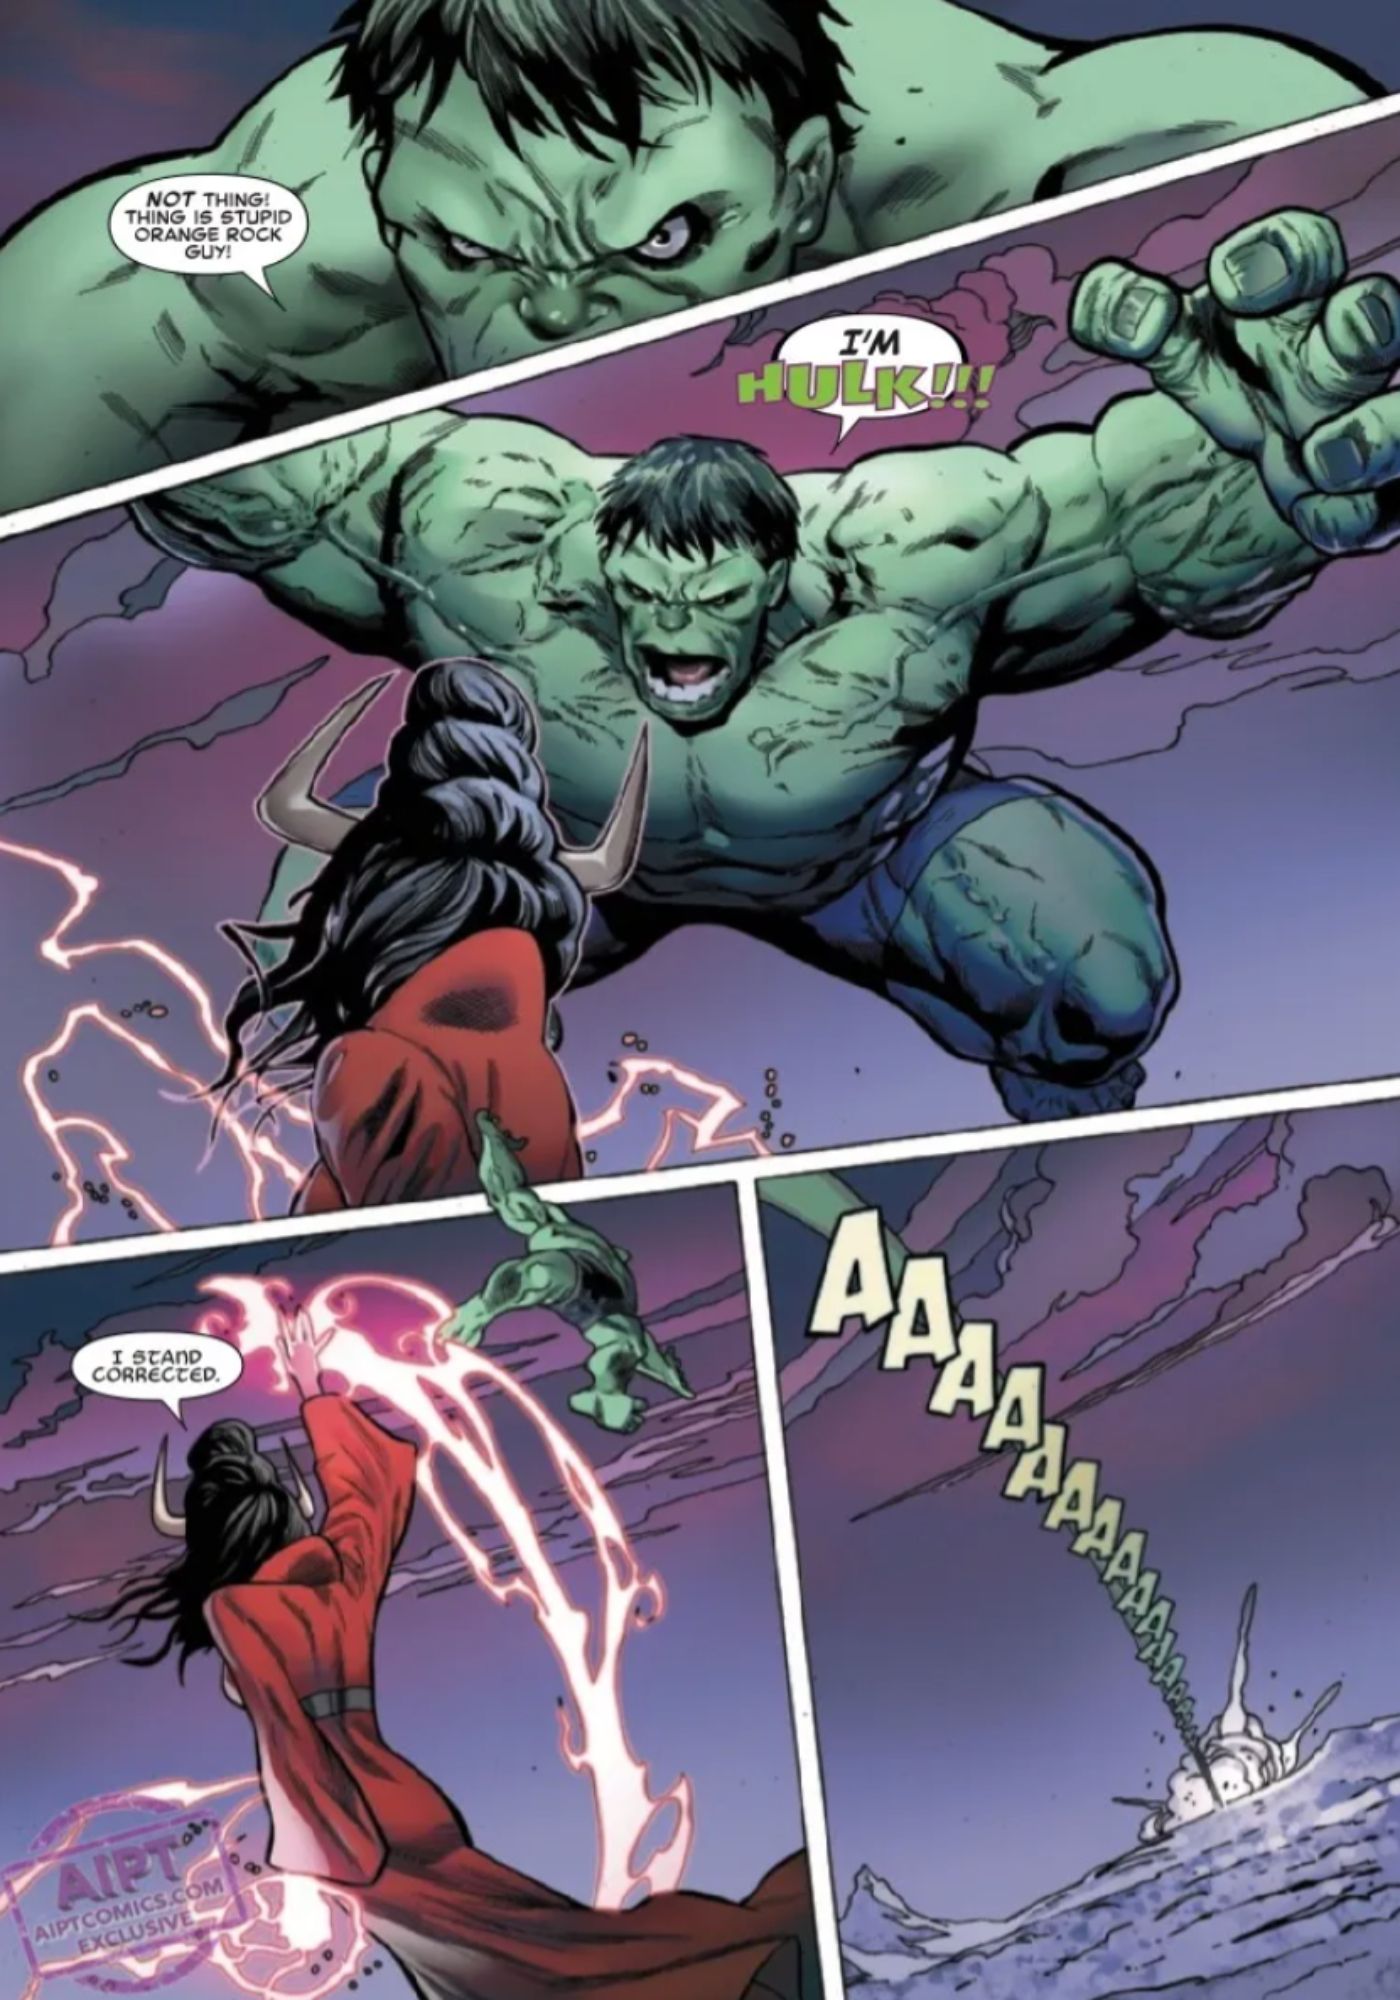 Hulk Cant Stand Being Compared to One Marvel Hero